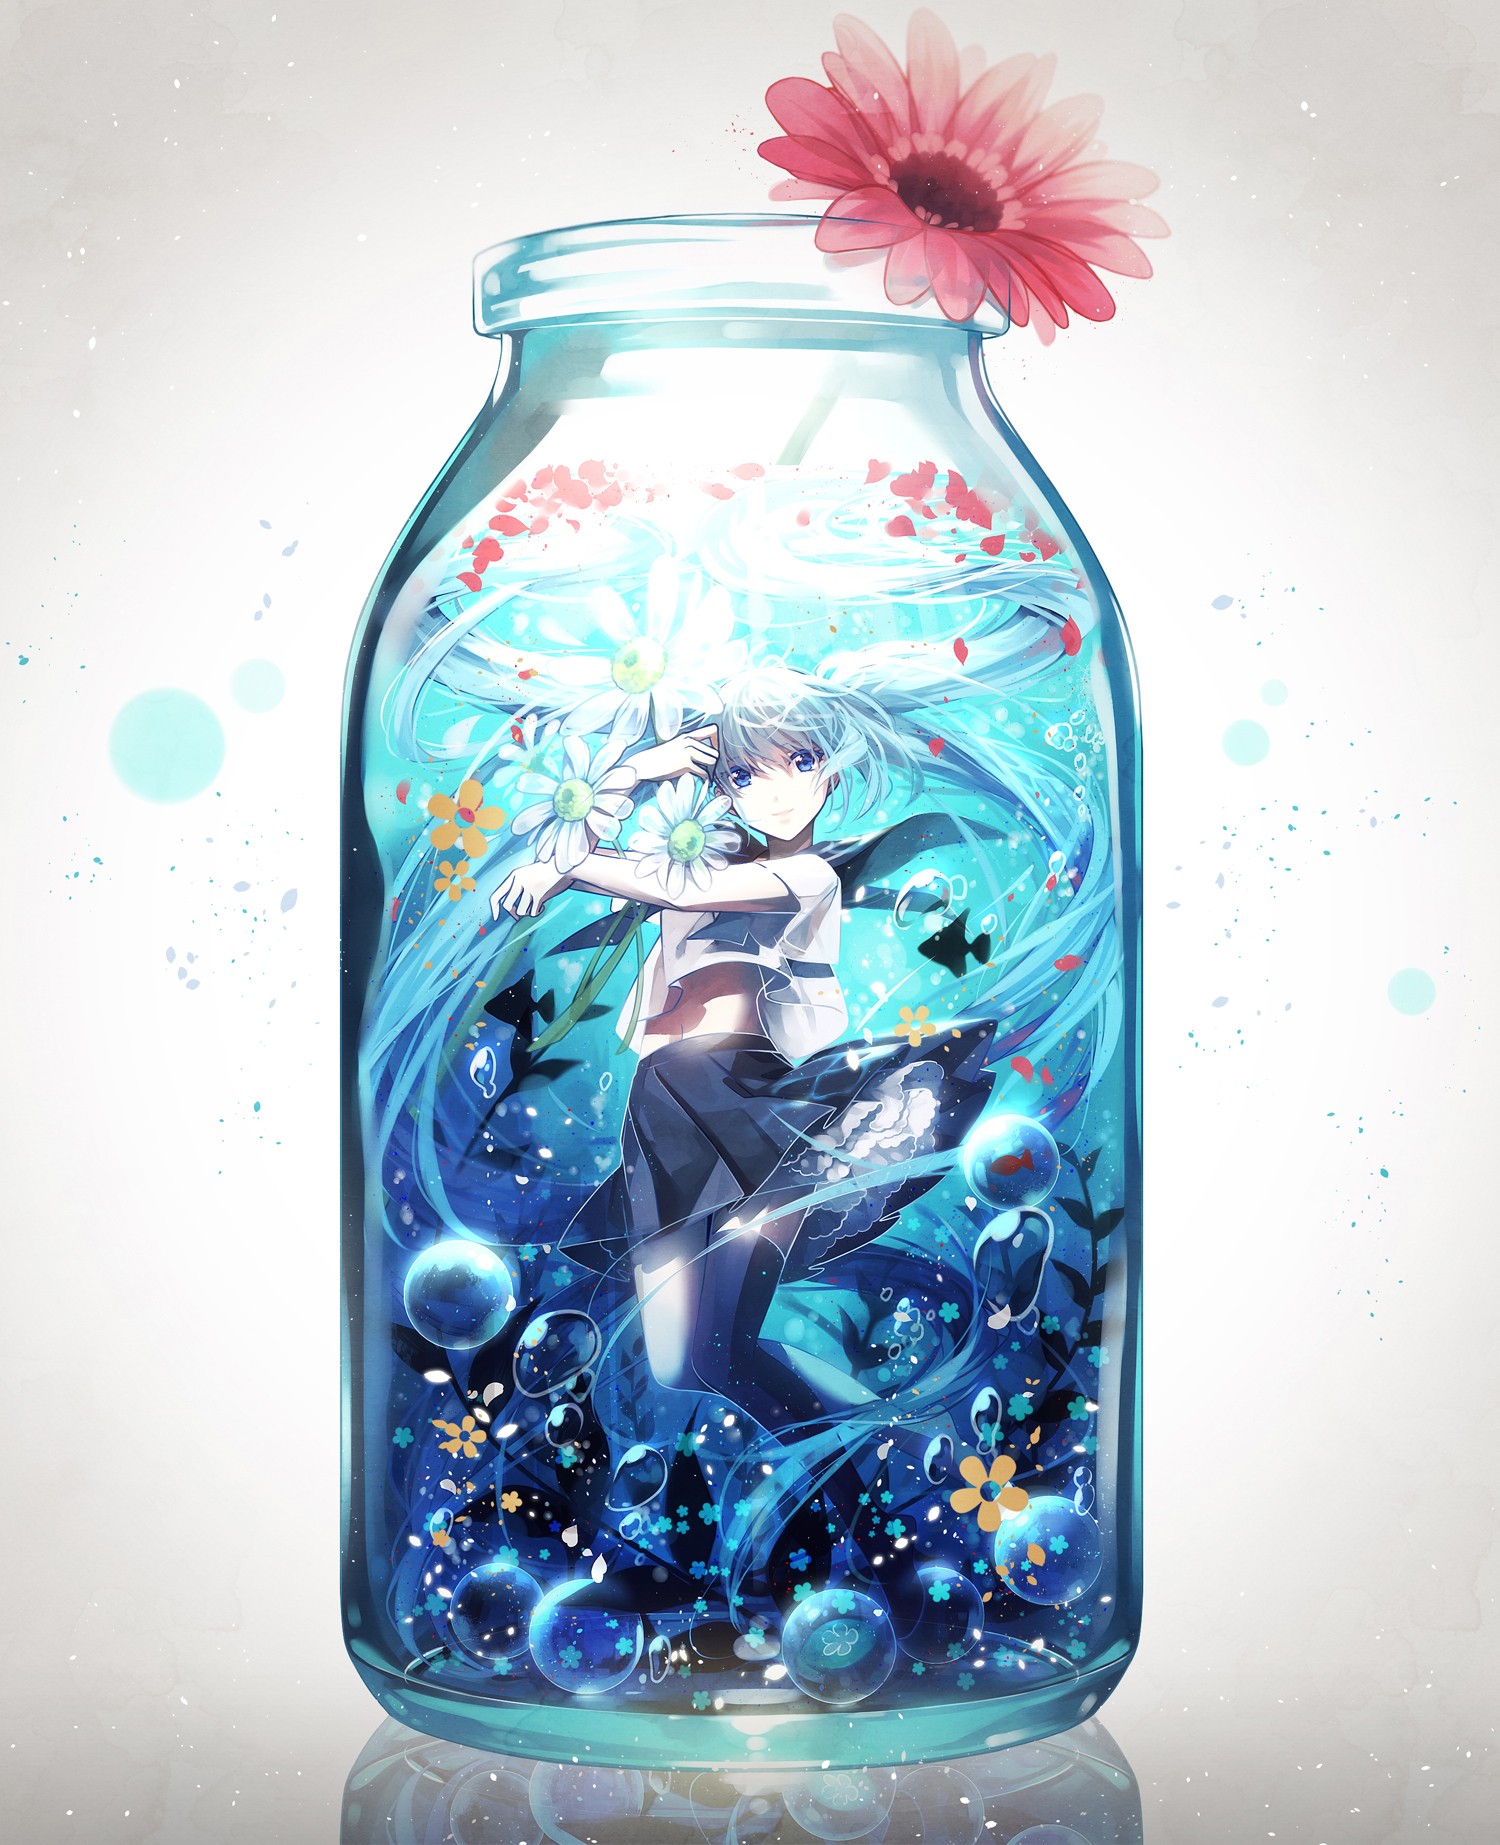 Anime 1500x1845 Vocaloid Hatsune Miku long hair twintails school uniform skirt thigh-highs bottles water bubbles flowers petals simple background anime girls anime blue white background